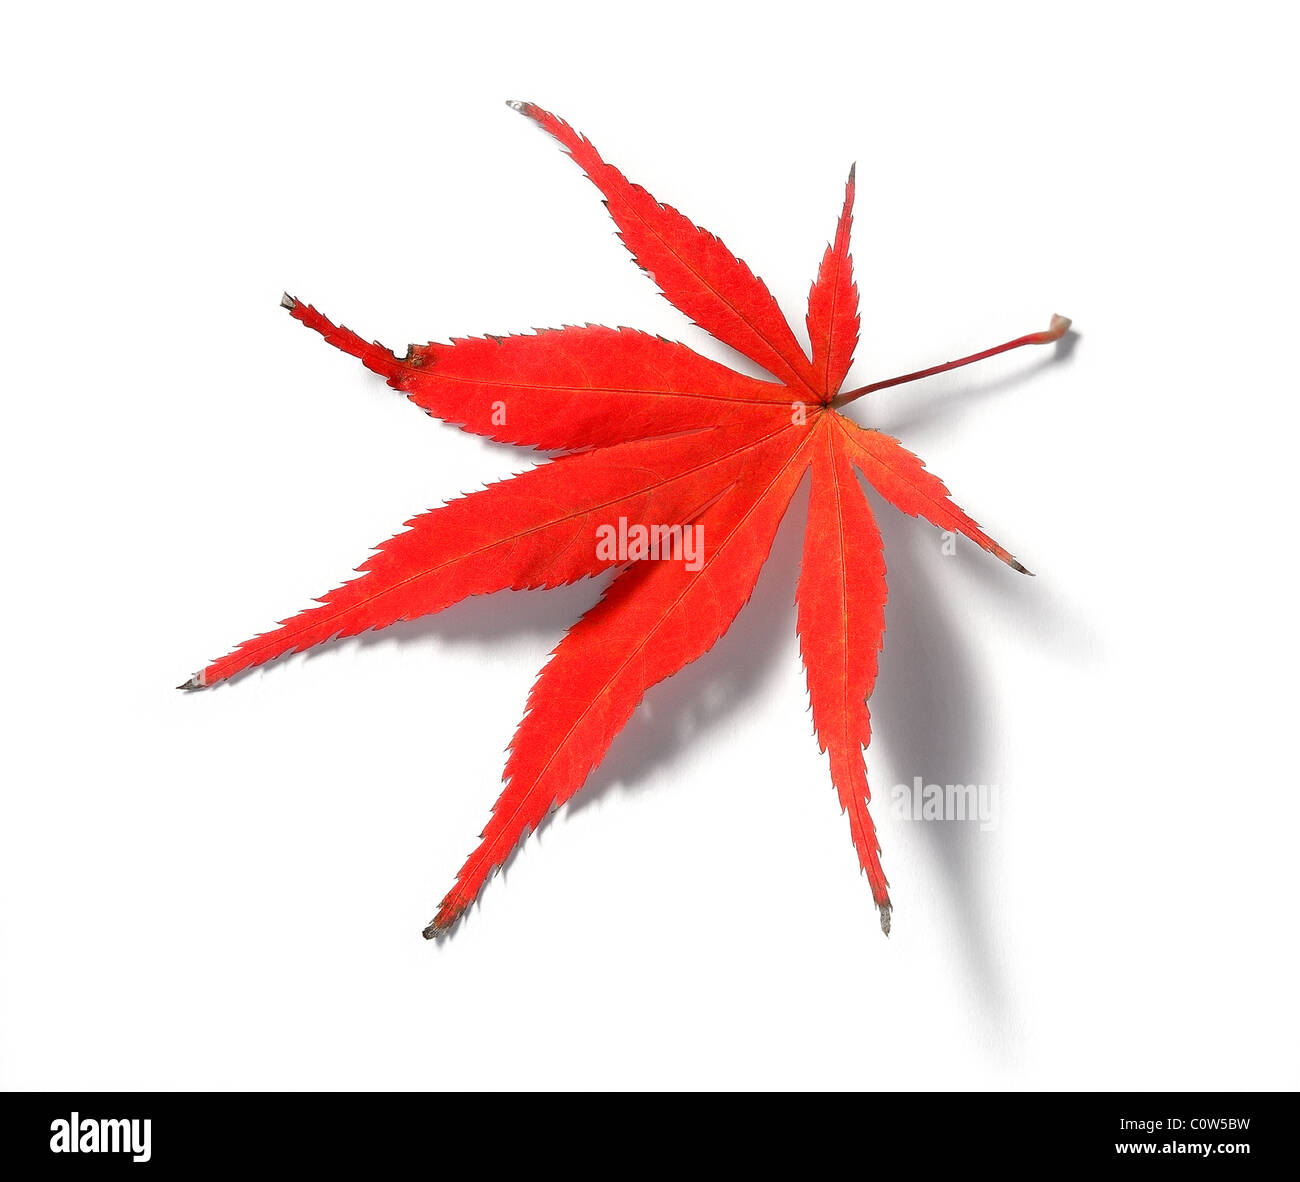 Red Japanese Maple or Acer Leaf in Autumn shot against a white background Stock Photo